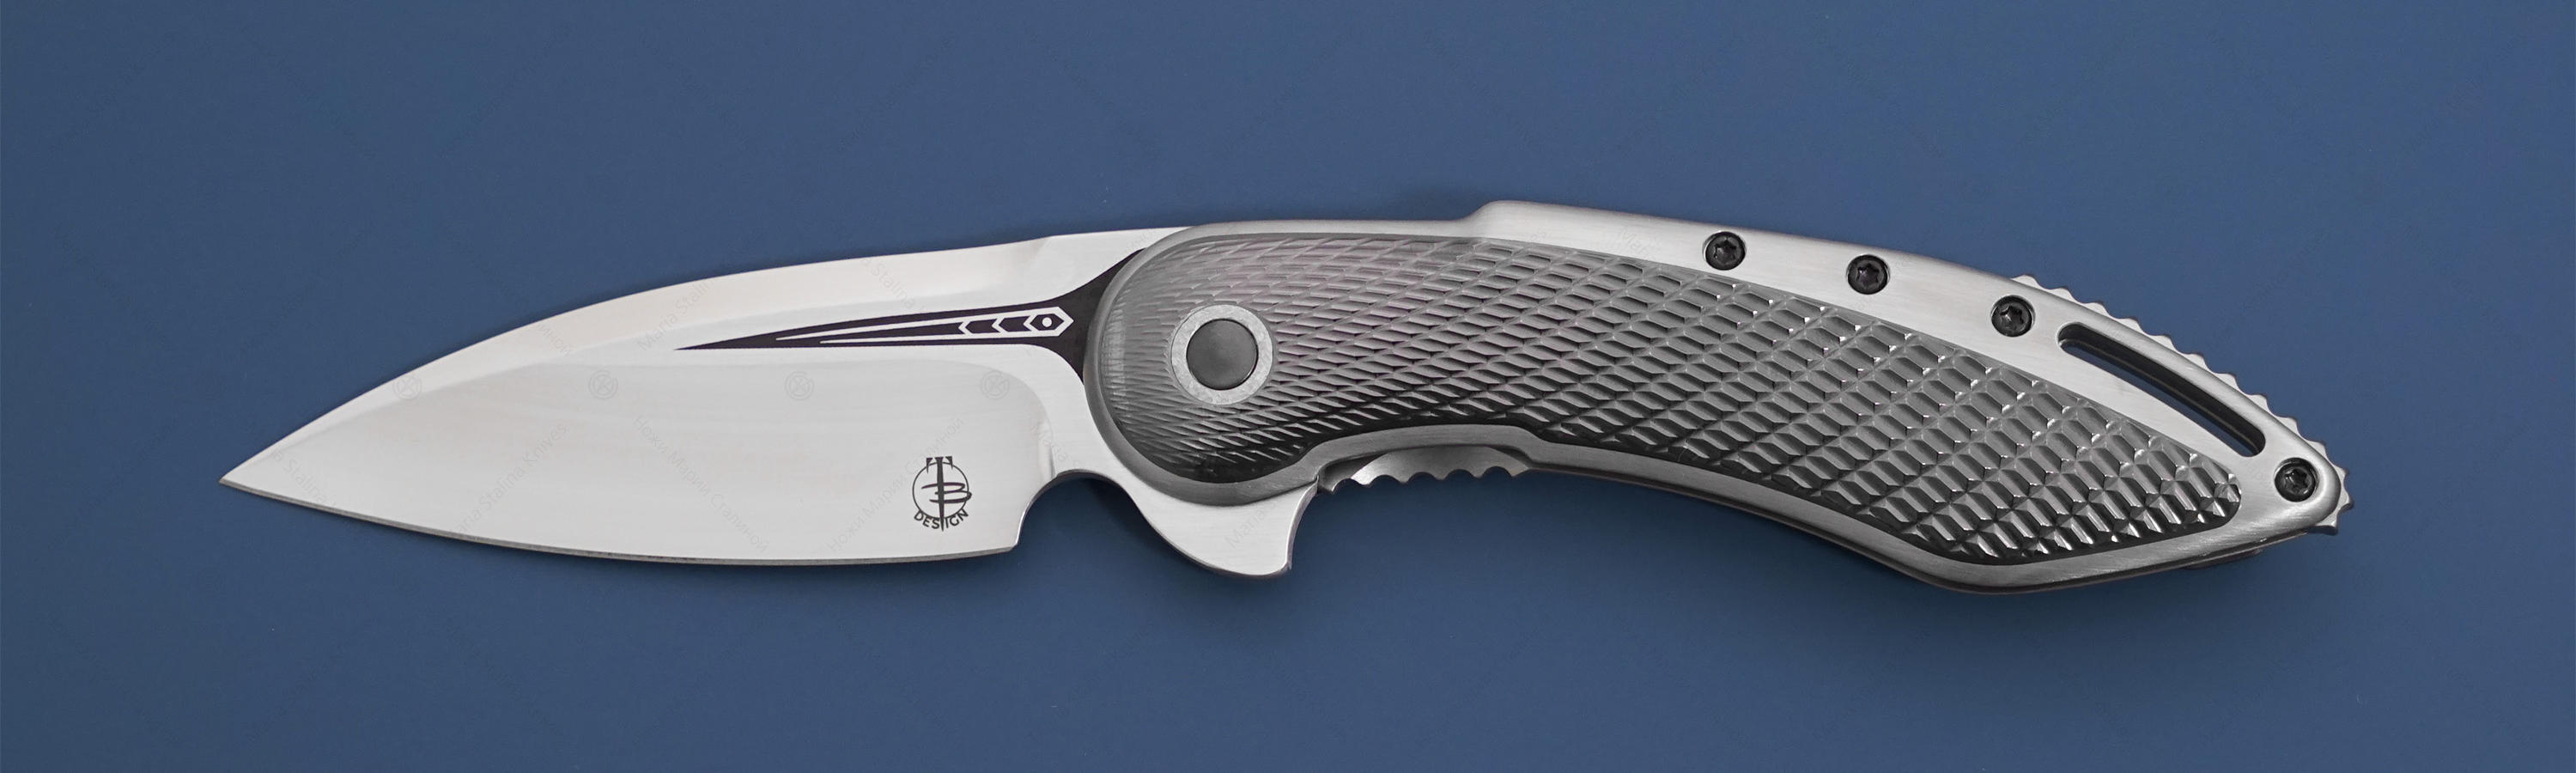 Begg Knives Glimpse Zirc Inlay